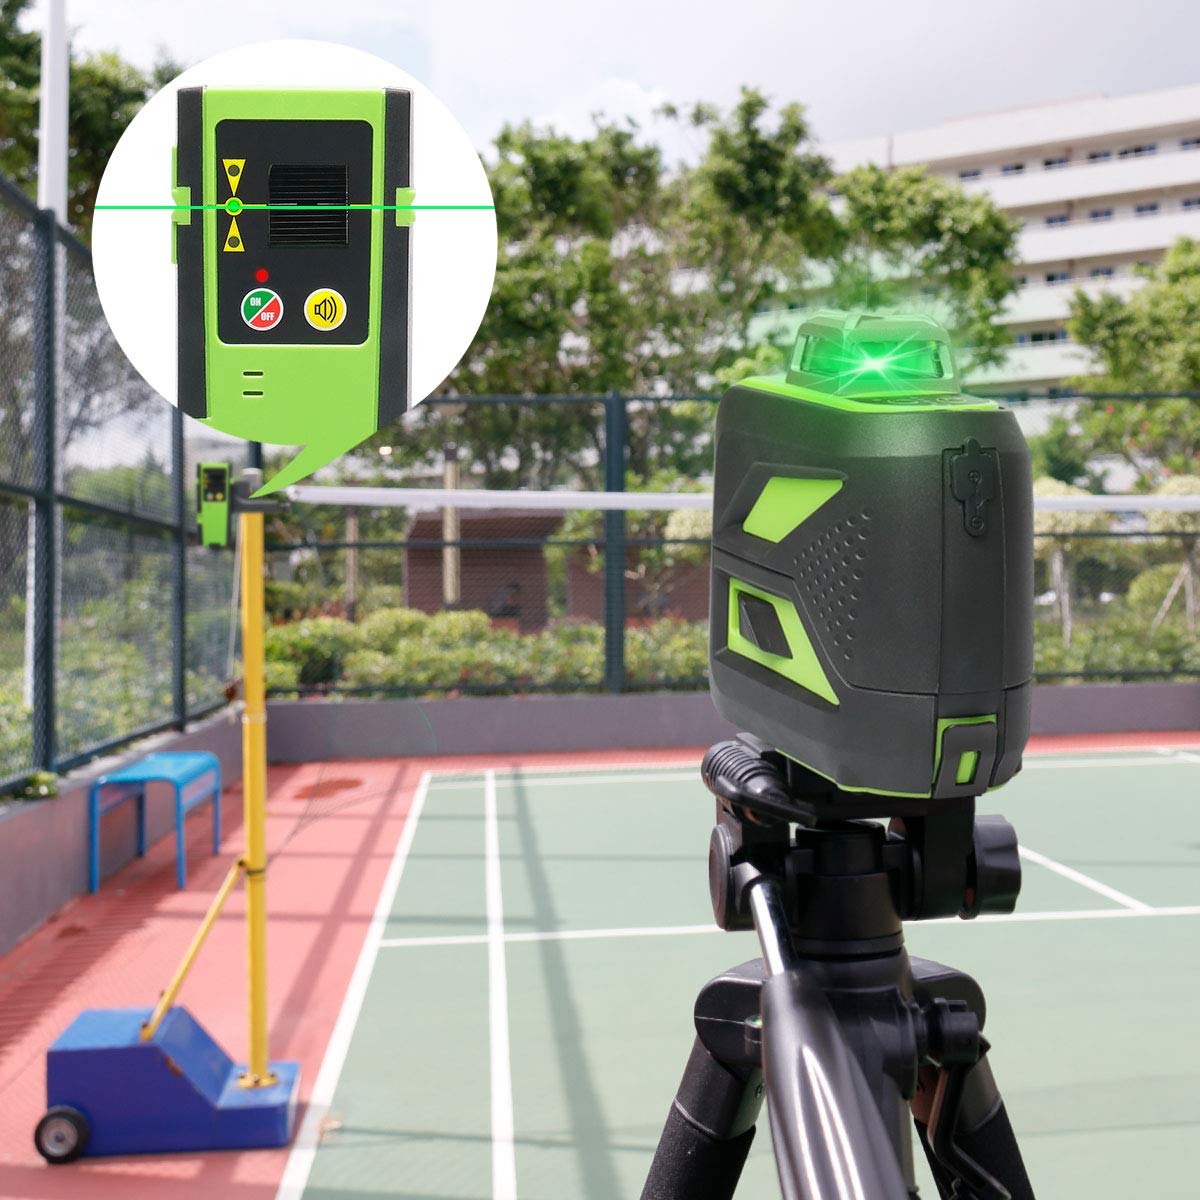 Huepar 3D Green Beam Self-Leveling Laser Level 3x360 Cross Line Laser Three-Plane Leveling and Alignment Line Laser Level -Two 360° Vertical and One 360° Horizontal Line -Magnetic Pivoting Base 603CG